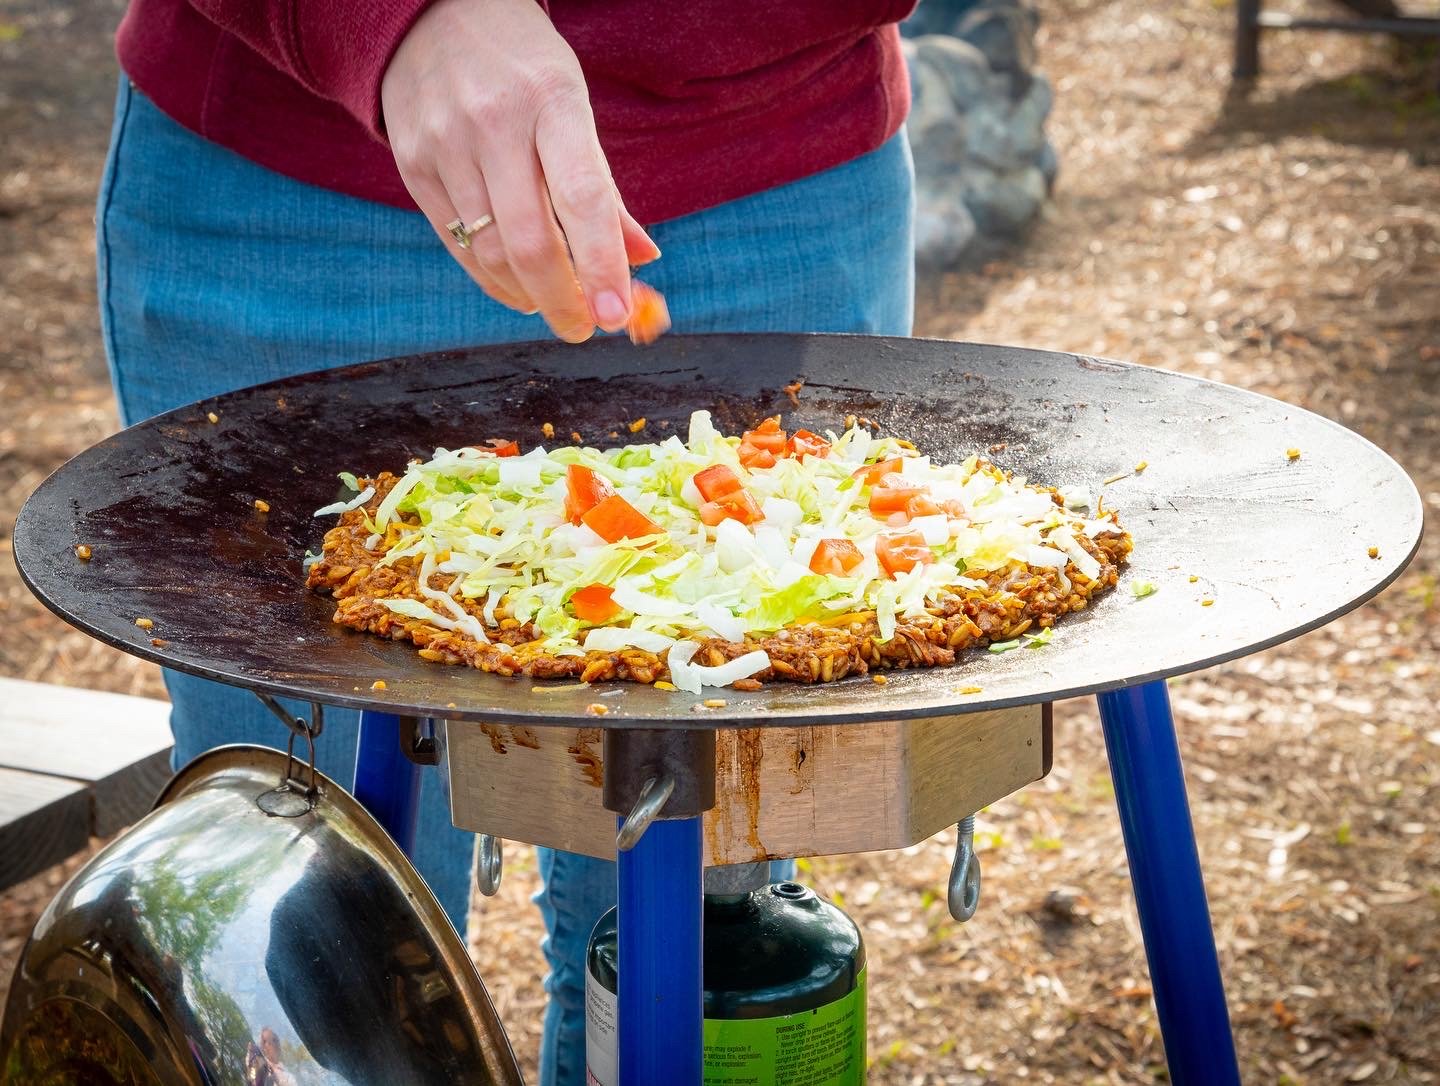 Tembo Tusk Skottle Grill - A Camping Gear Favorite